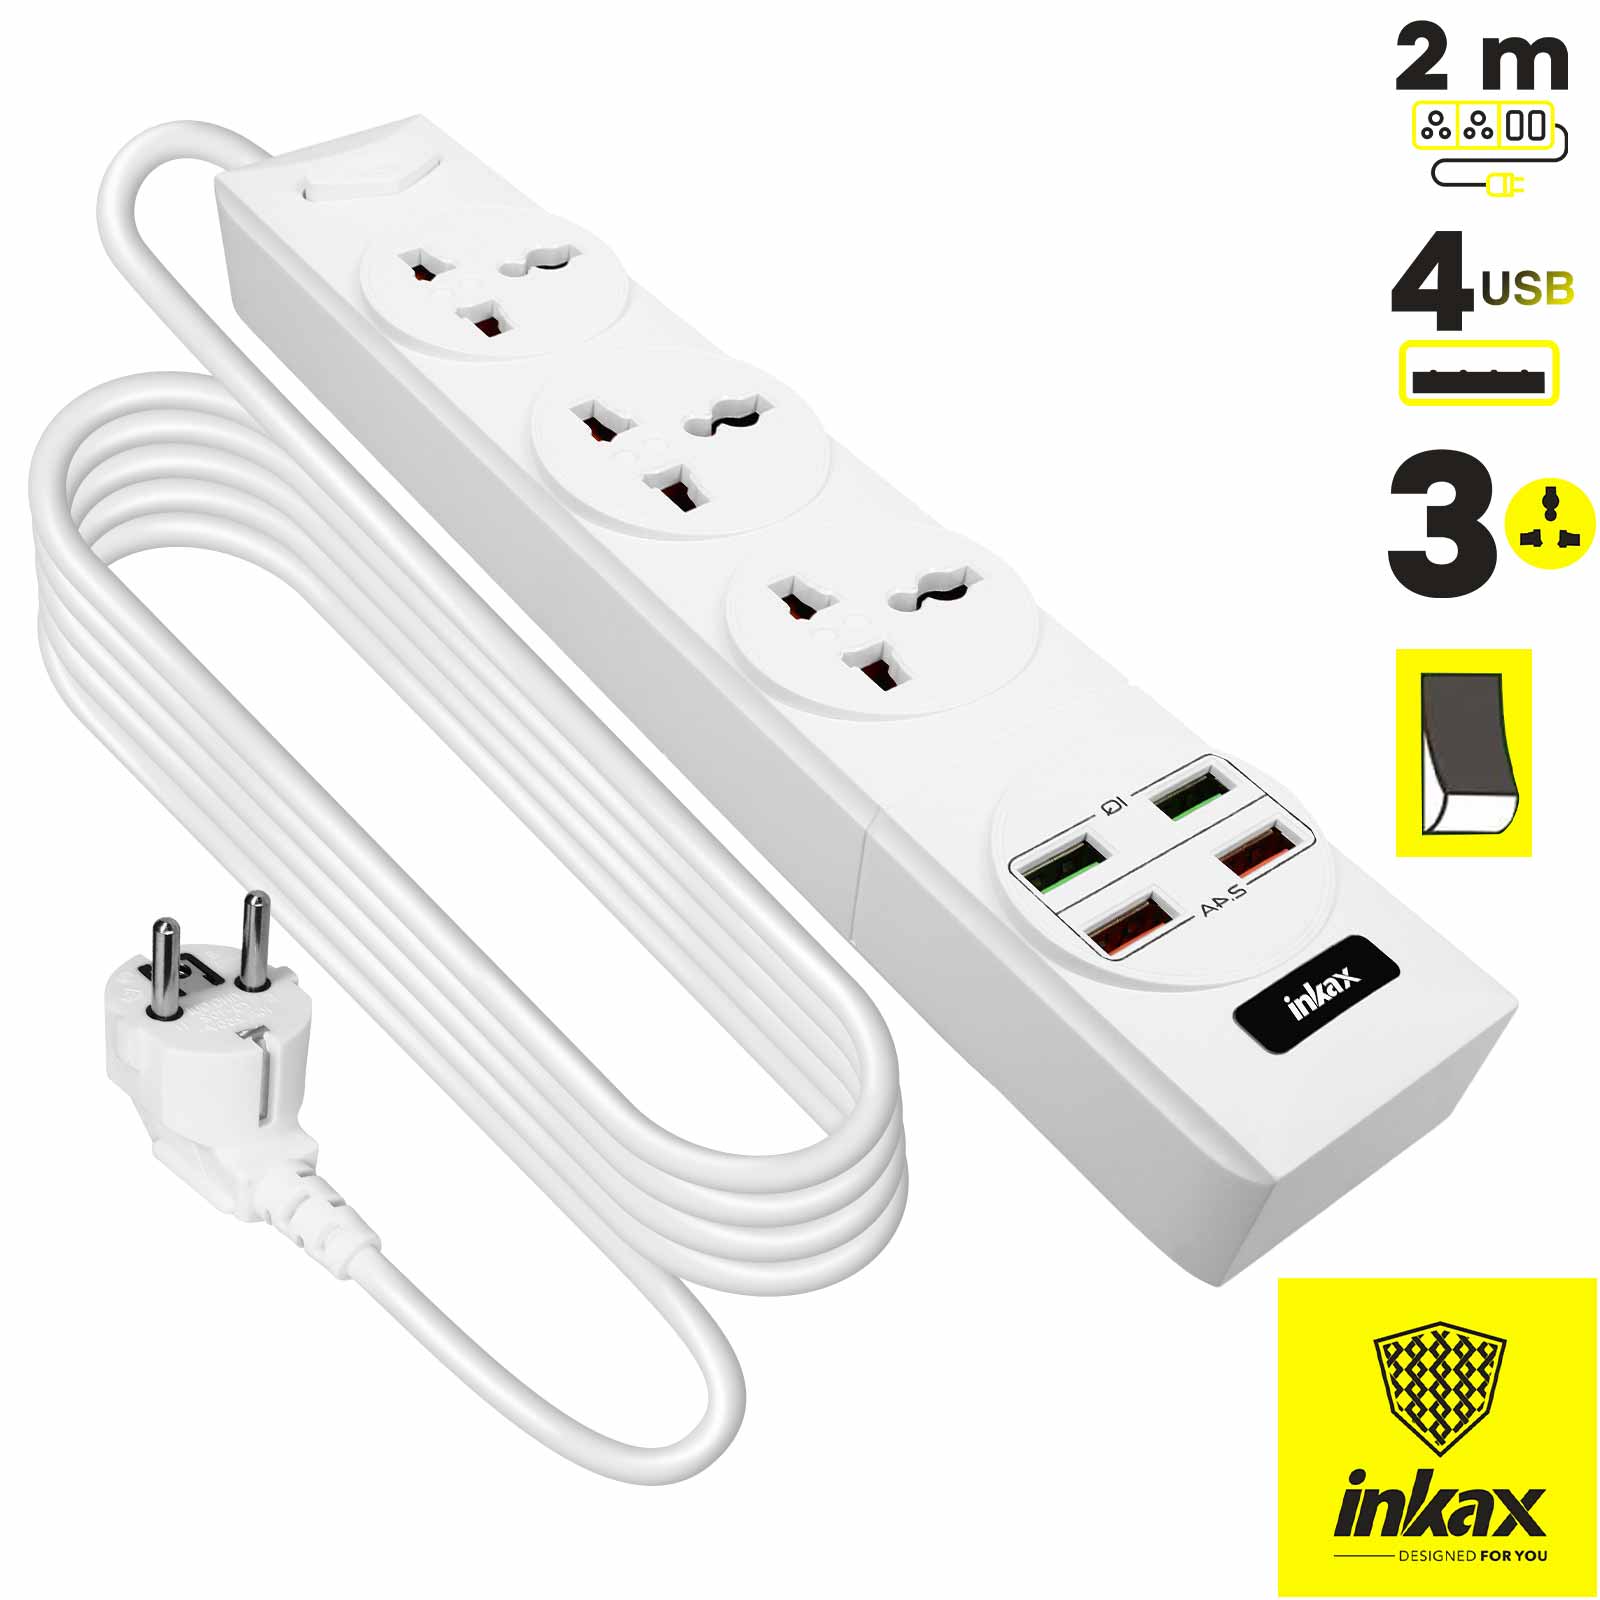 Multiprise Universelle Inkax, 3x Prises courant + 4x Ports USB, Bouton  d'alimentation